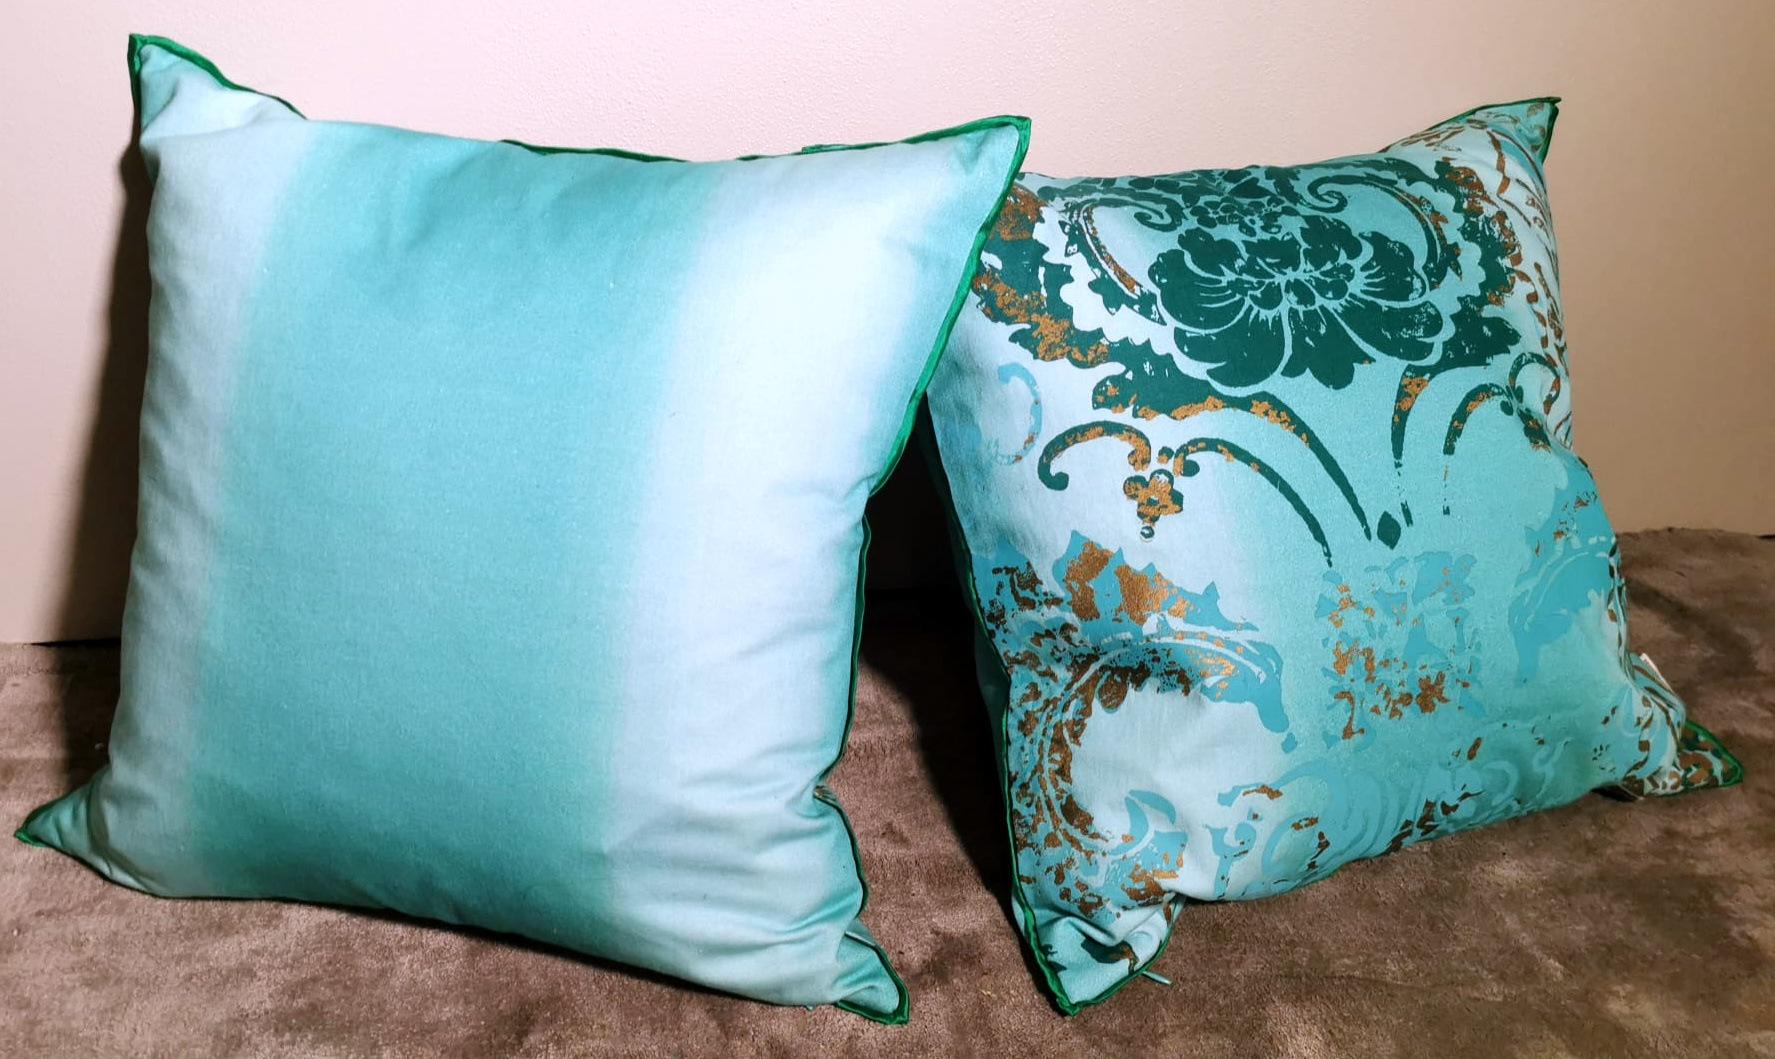 Guild Designer Pair of Printed Cotton Pillows with Feather Interior For Sale 7